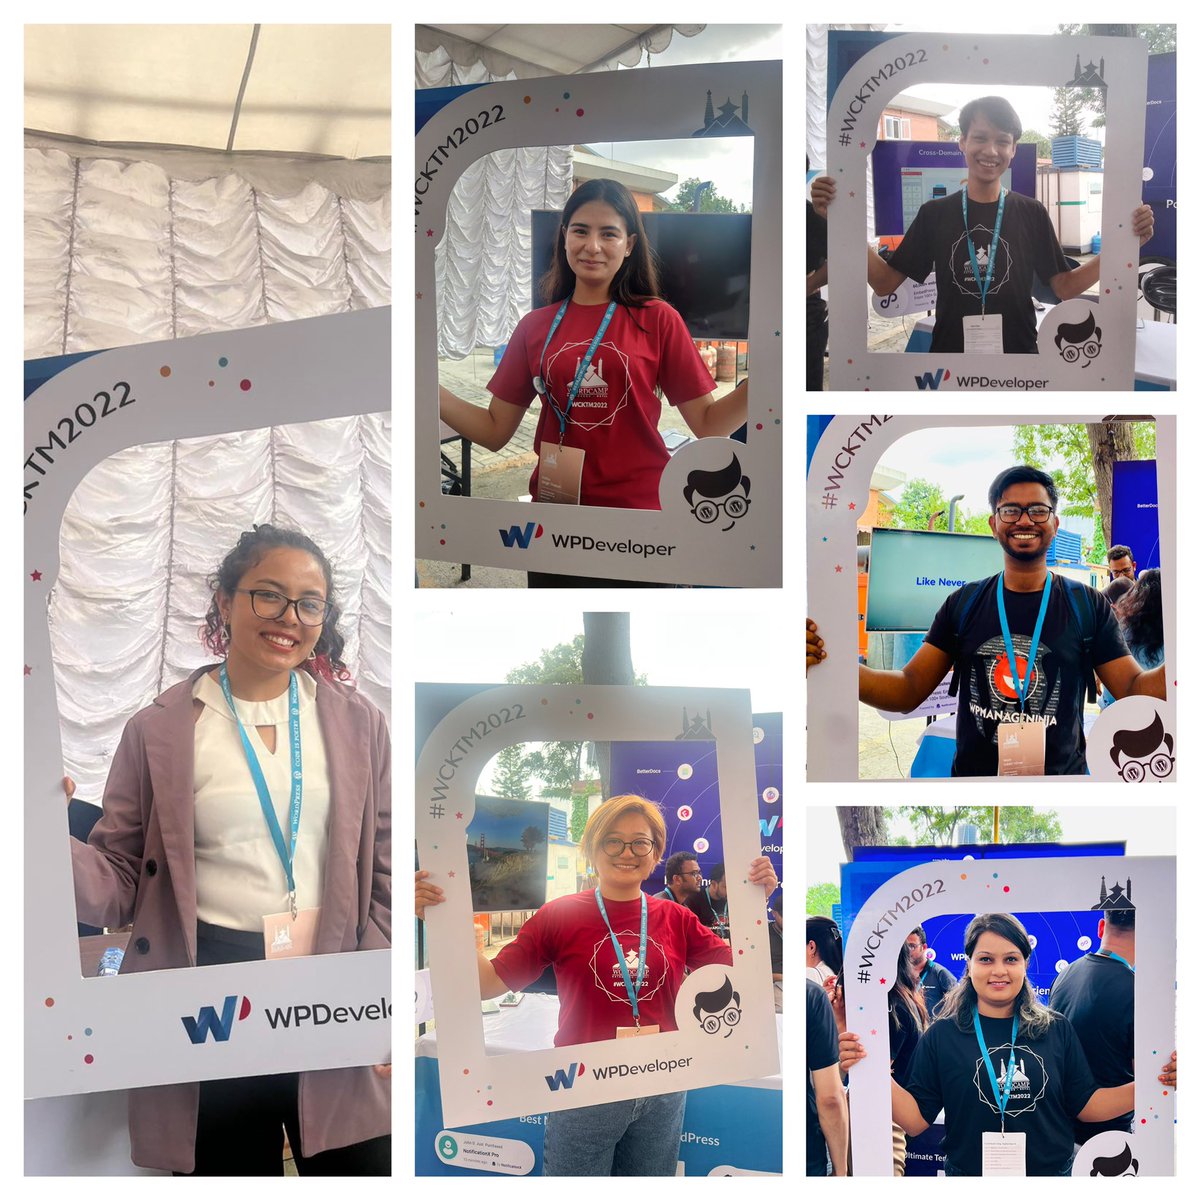 test Twitter Media - Wow! So many participants at #WCKTM2022 #LoveWPDeveloper contest! Keep it going! Visit @WPDevTeam booth for your swag! https://t.co/LpJpoOUmXR